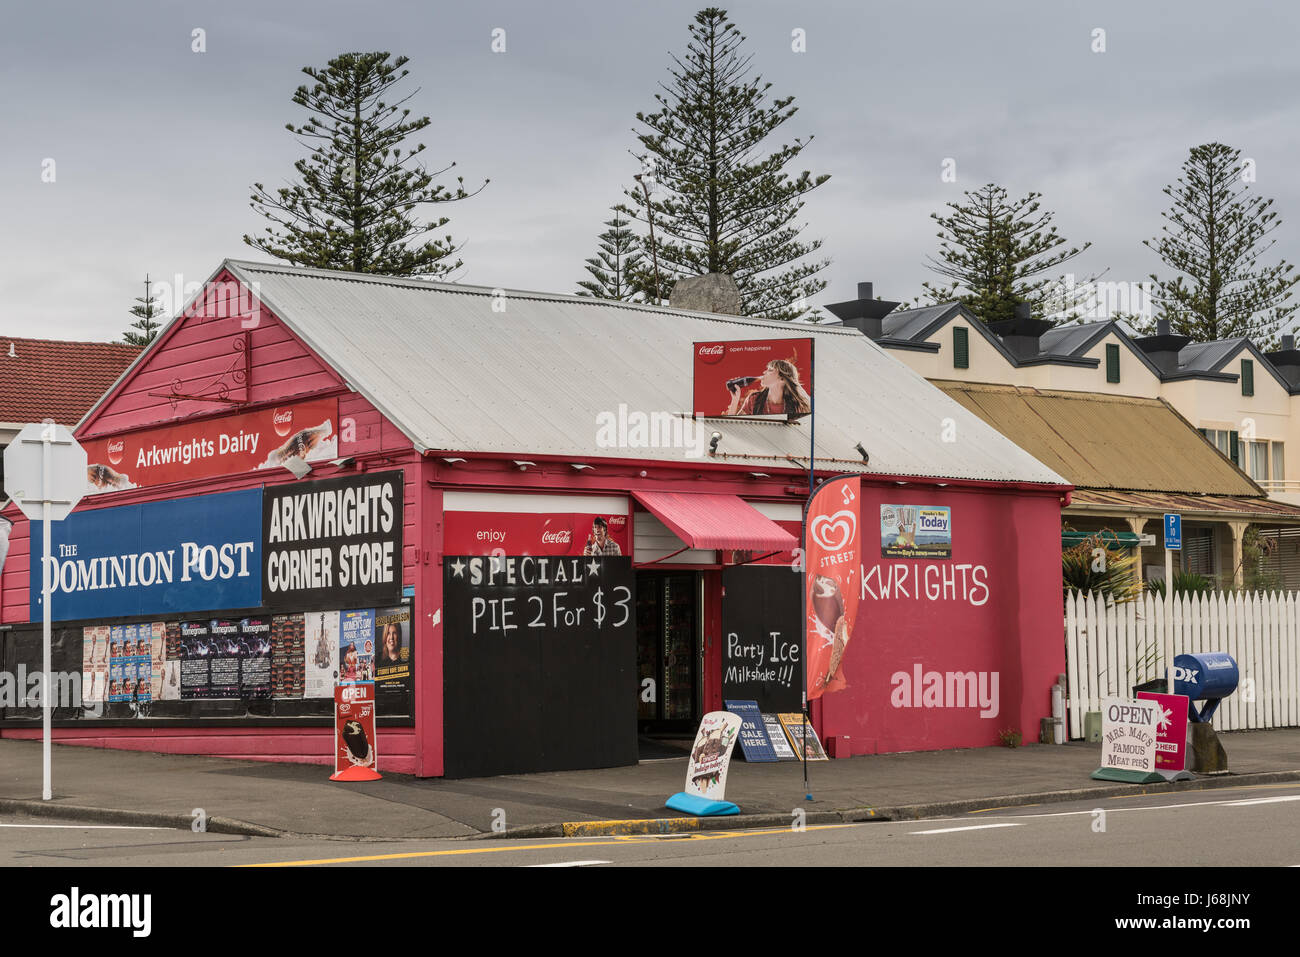 Napier, New Zealand - March 9, 2017: Arkwrights Dairy is a corner store selling groceries, newspapers and basic household products. Red paint, colored Stock Photo